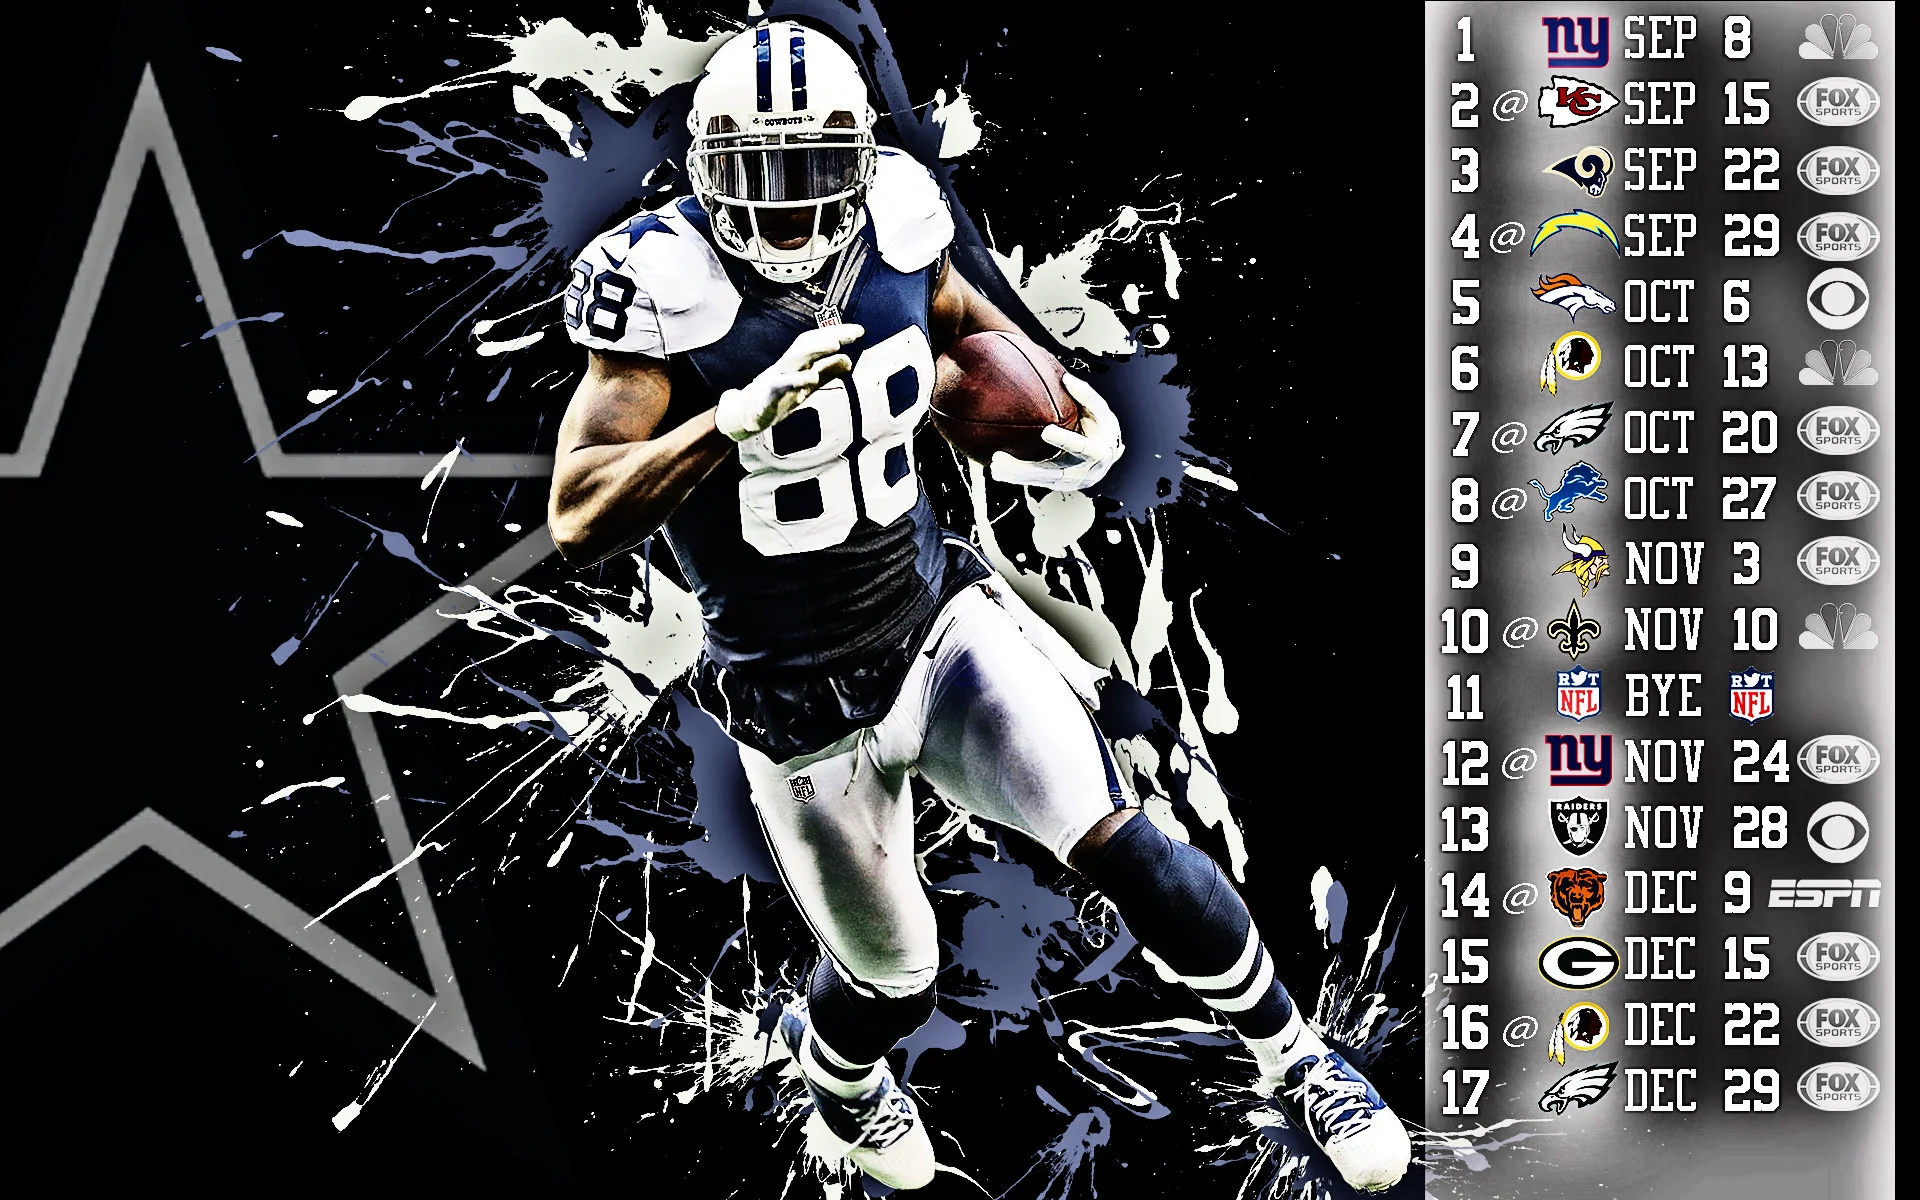 Wallpapers Of Dallas Cowboys Wallpapers) – HD Wallpapers